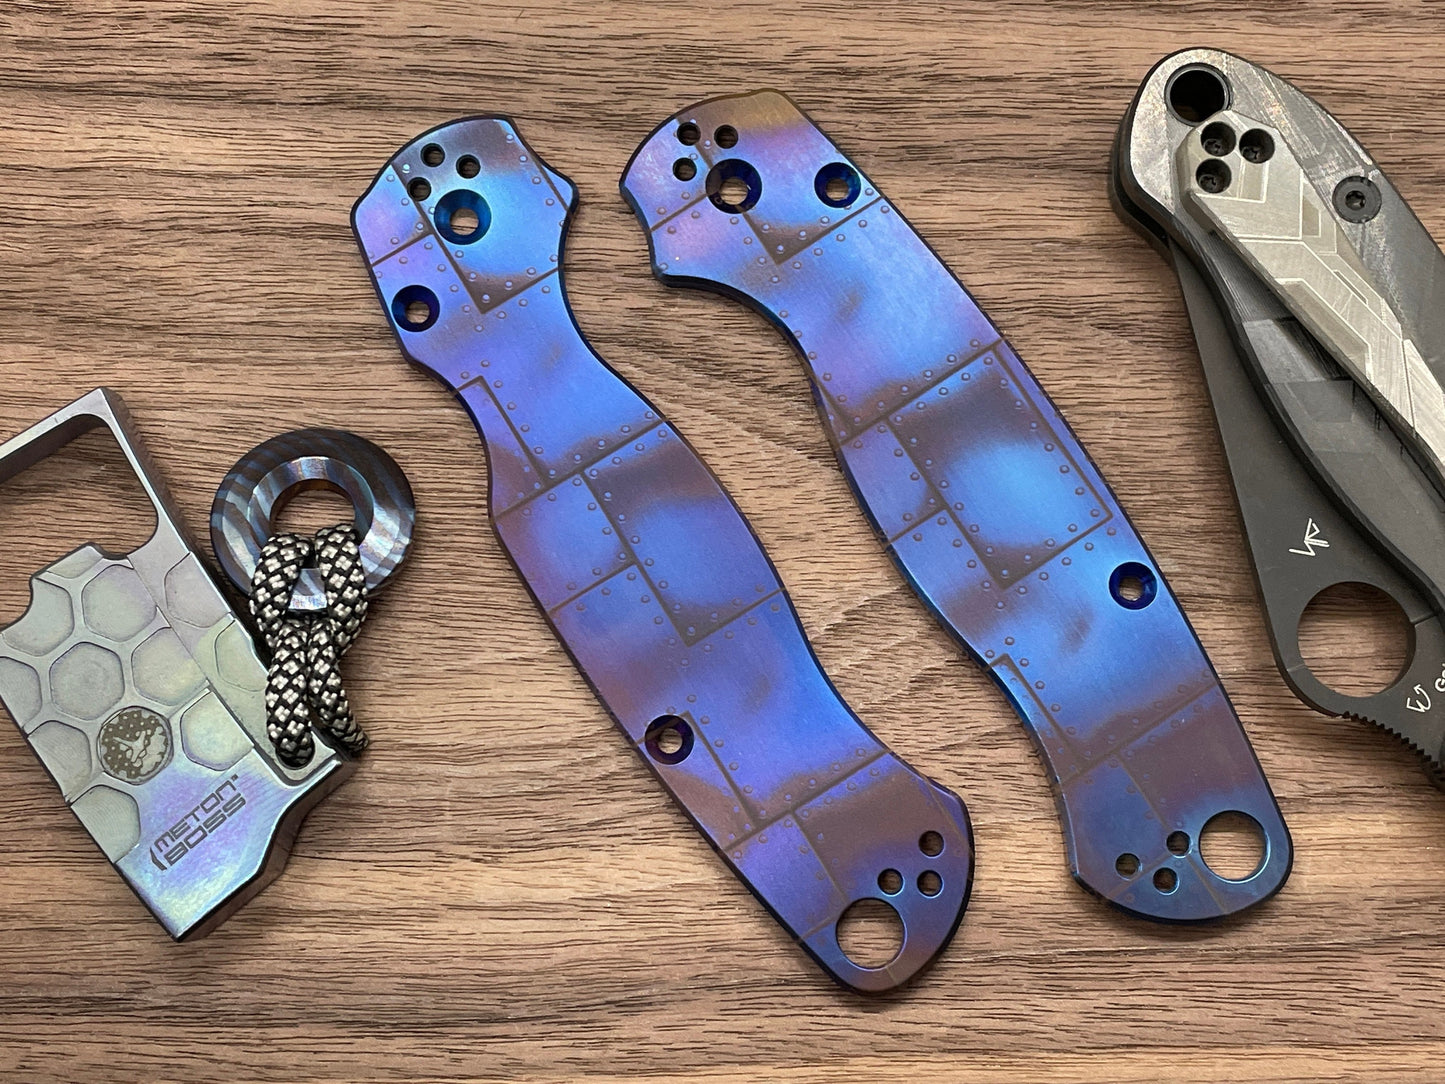 Flamed RIVETED AIRPLANE Titanium scales for Spyderco Paramilitary 2 PM2